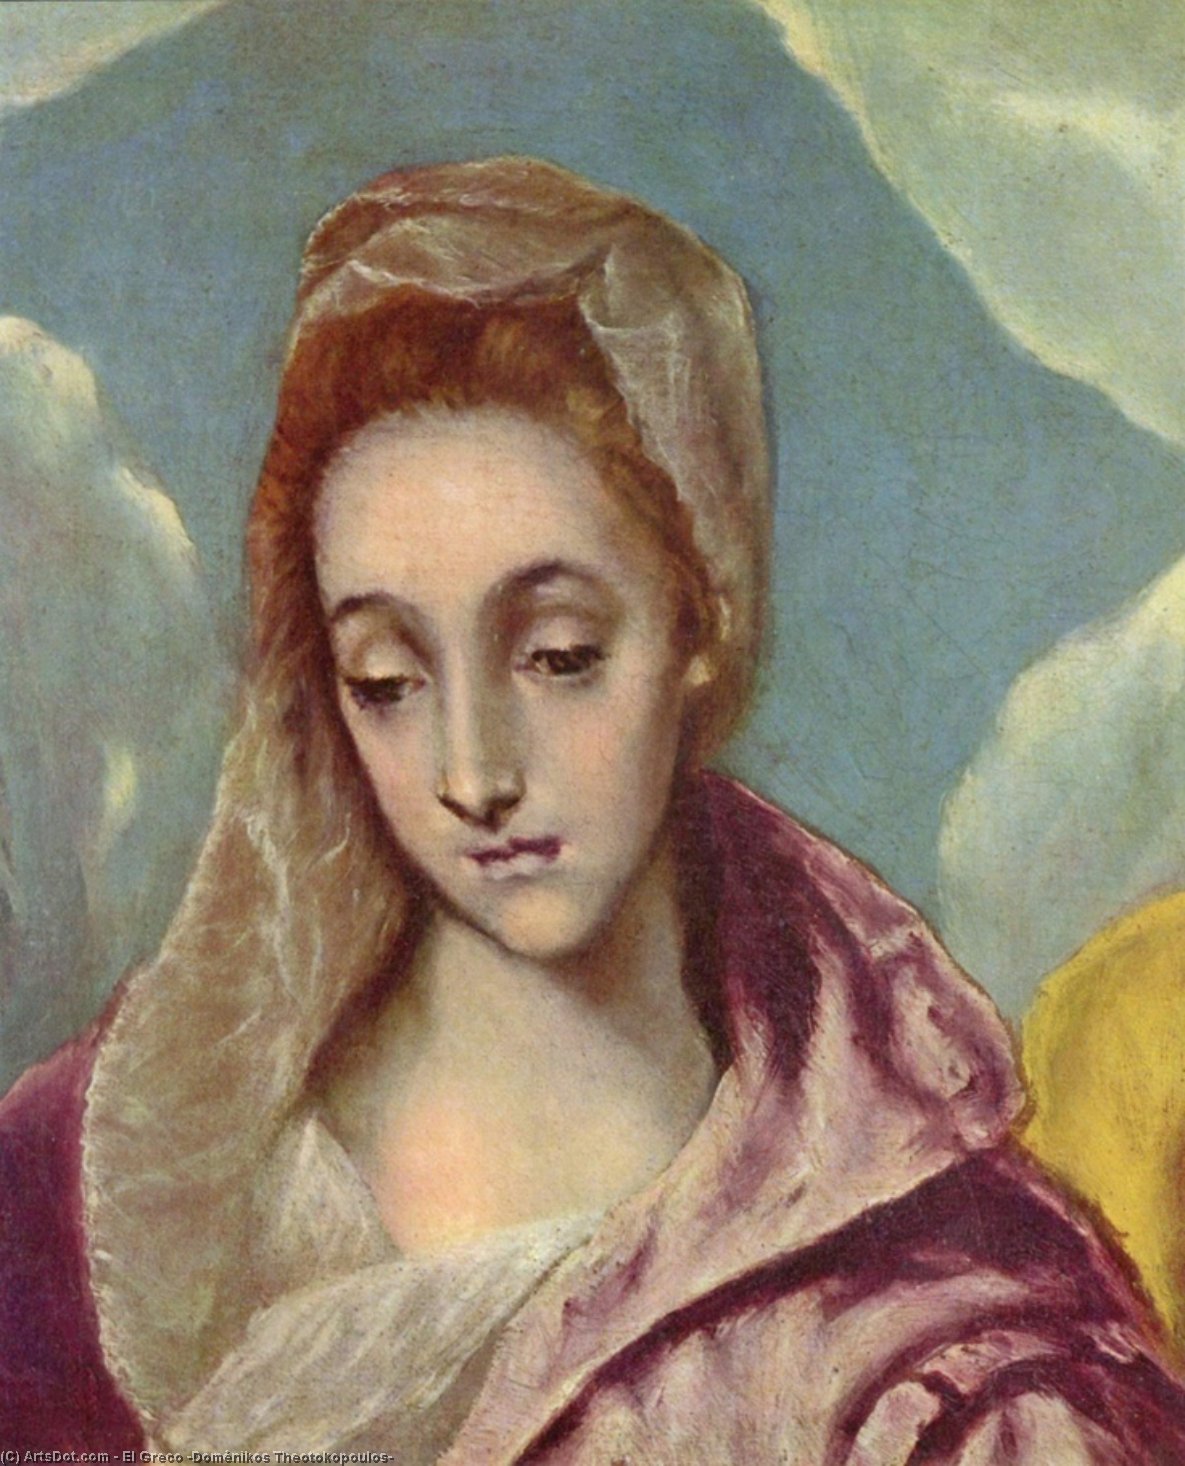 WikiOO.org - 백과 사전 - 회화, 삽화 El Greco (Doménikos Theotokopoulos) - Holy Family with St Anne (detail)